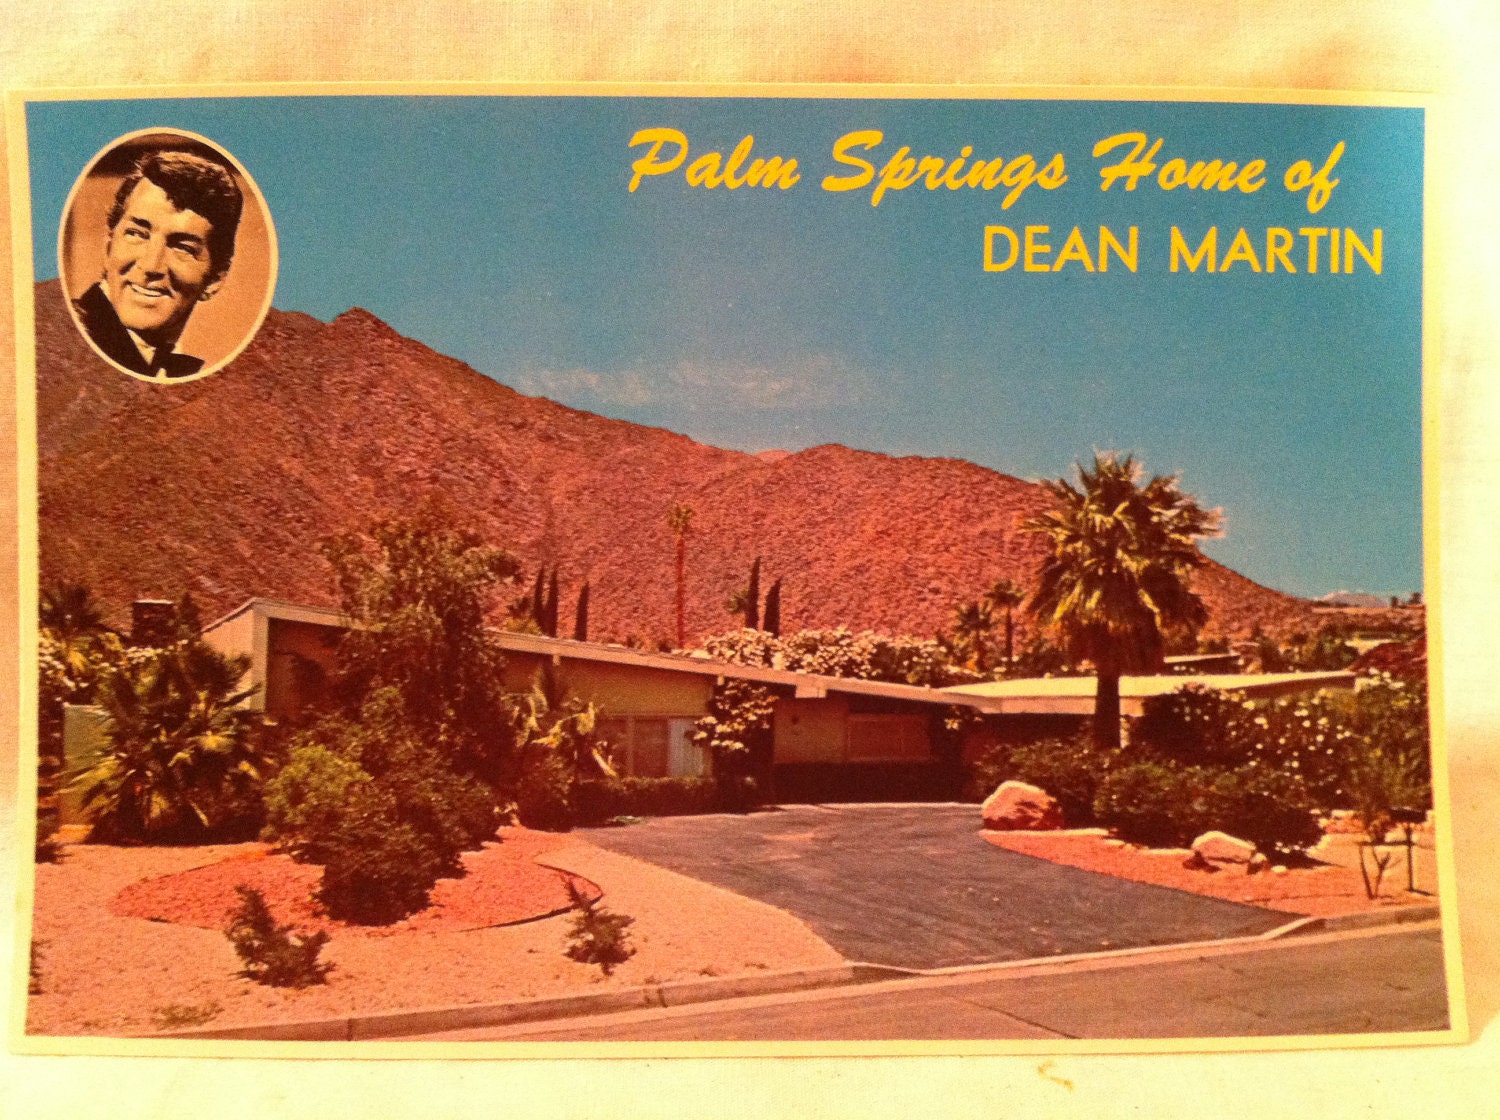 Dean martin's abandoned palm springs home